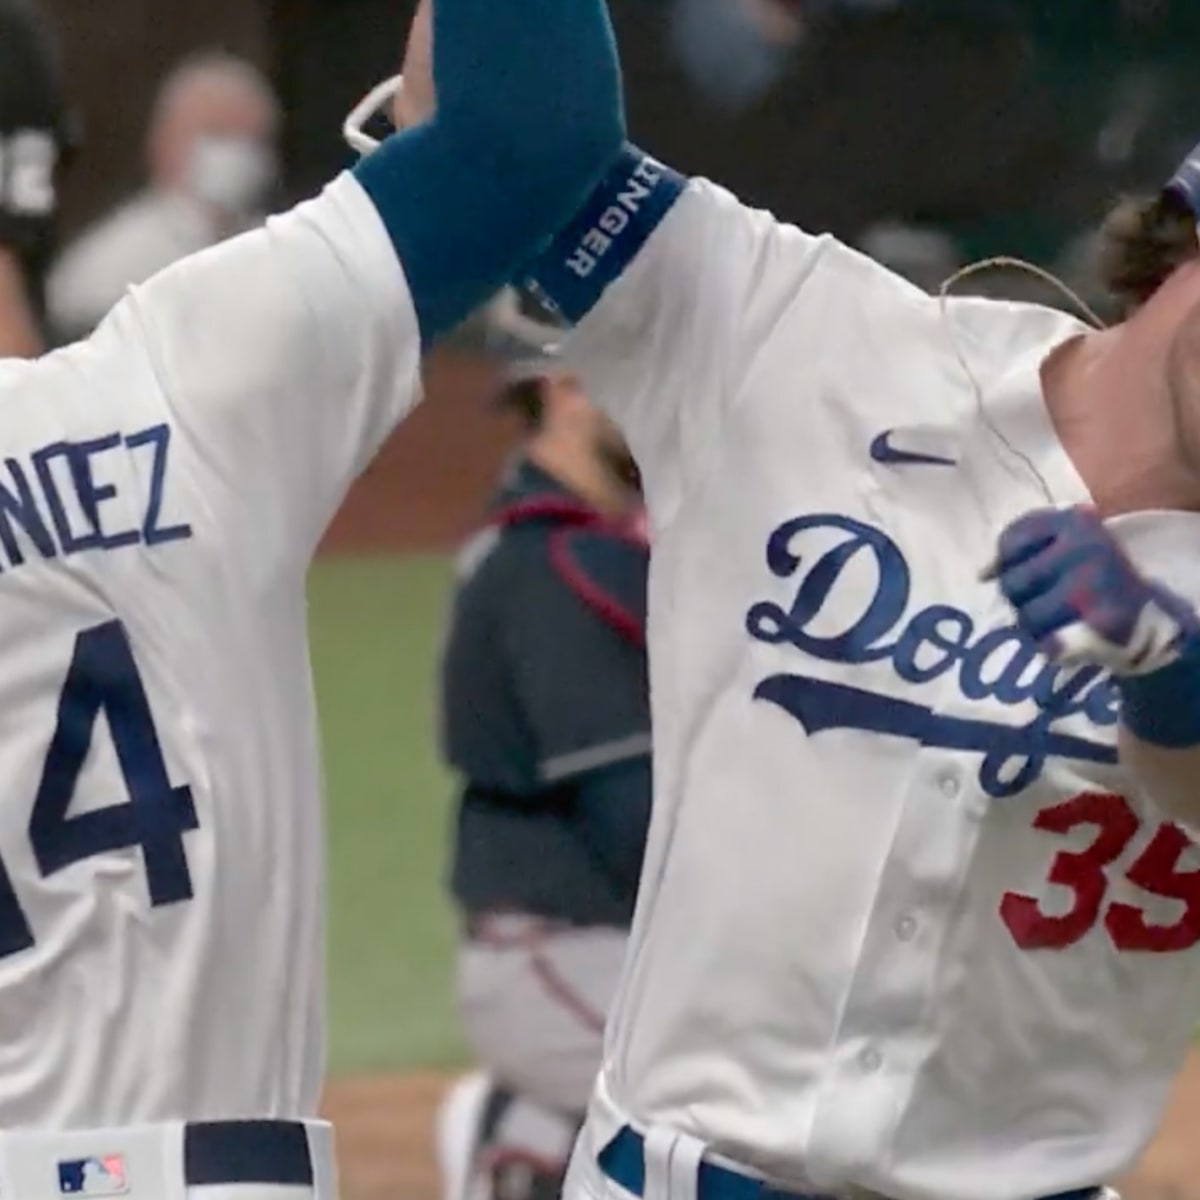 WATCH: Cody Bellinger leaves the game after making spectacular